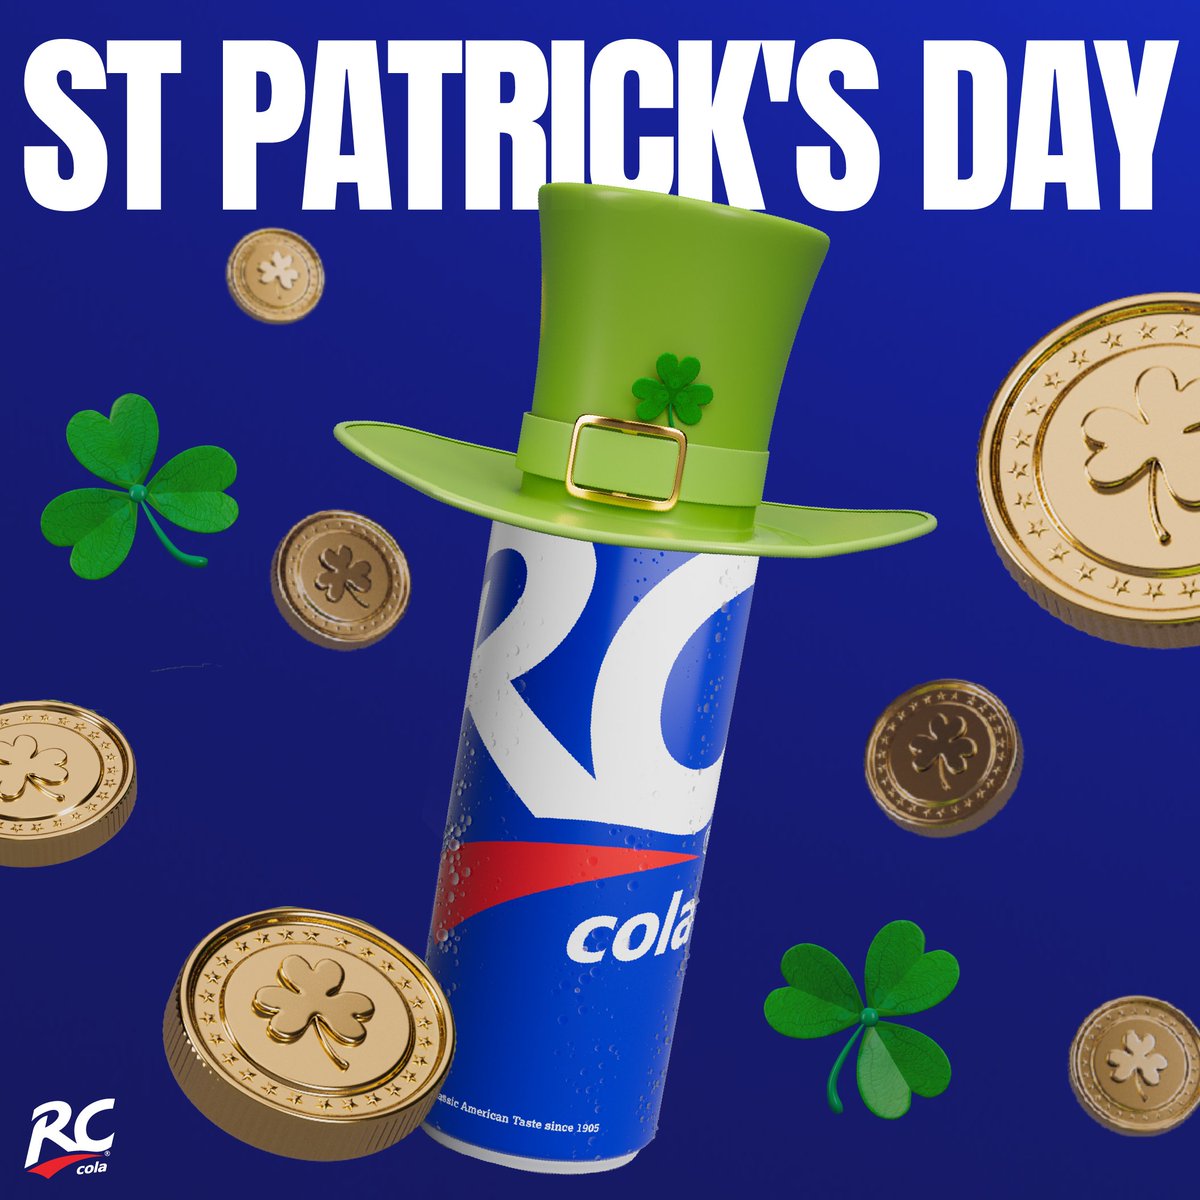 Happy St. Patrick's Day from all of us at RC Cola! 🍀 We're pretty sure that St Patrick himself would have savored a refreshing bottle of RC Cola, don't you agree? #StPatricksDay #BeverageIndustry